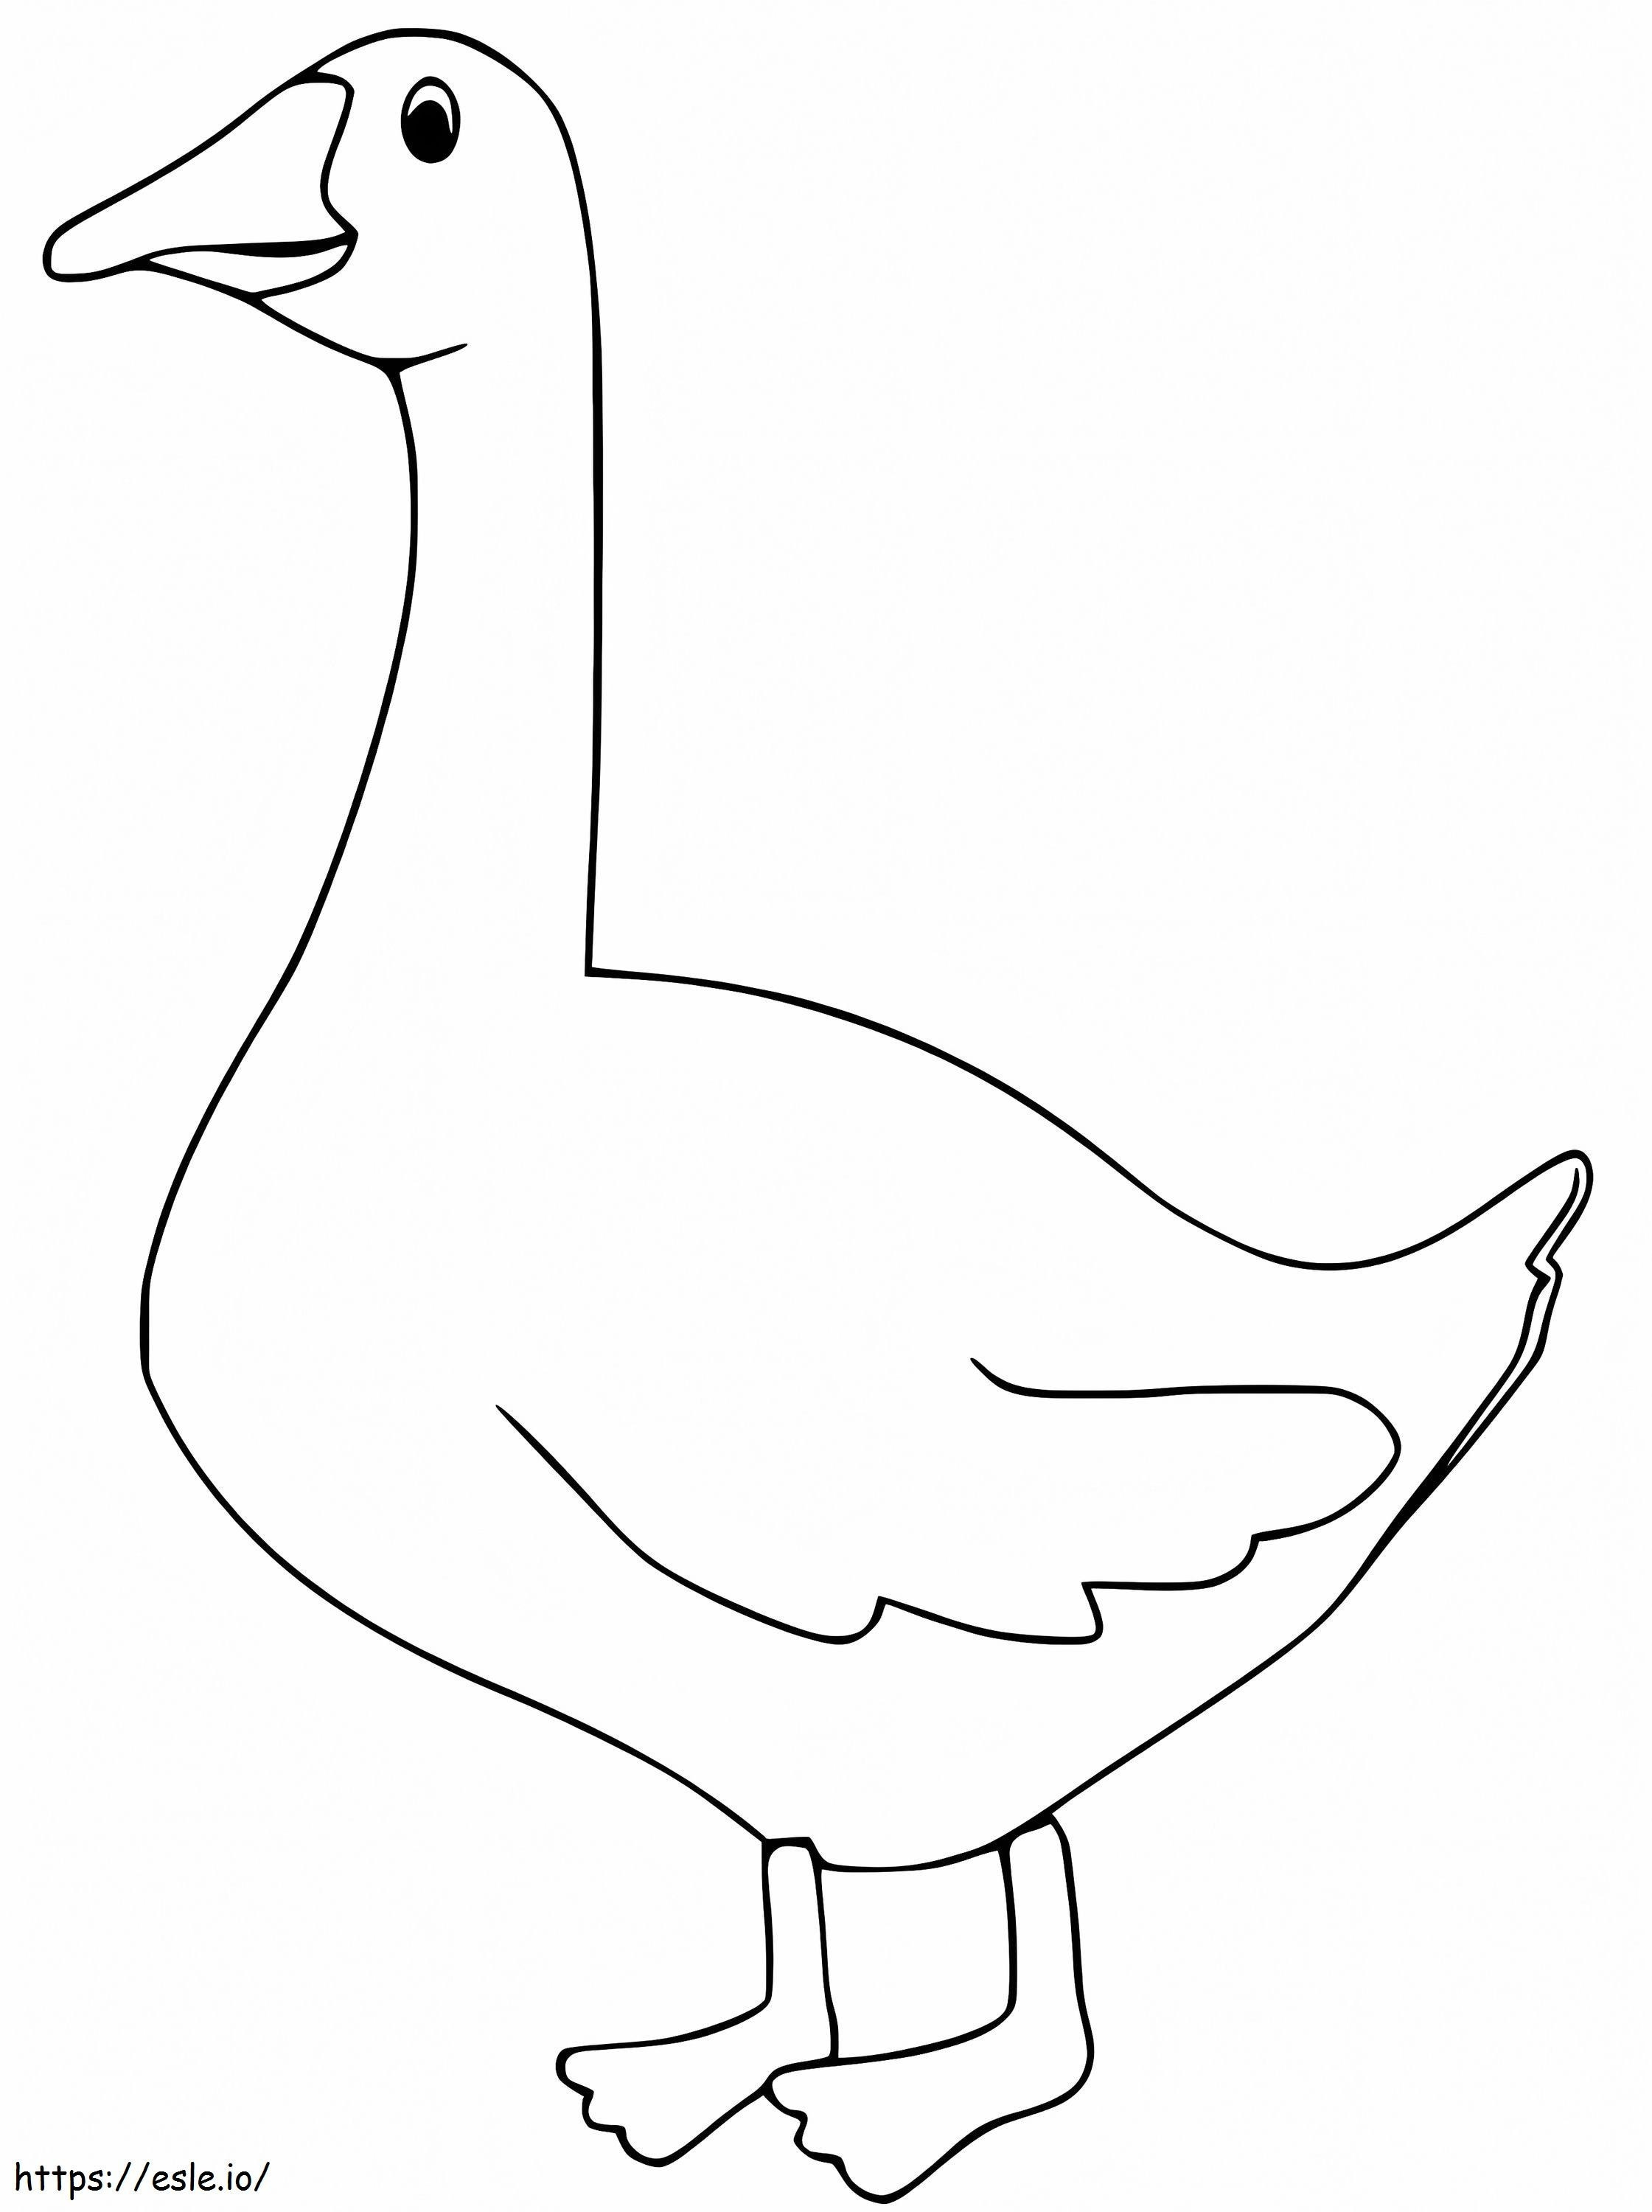 Goose 11 coloring page